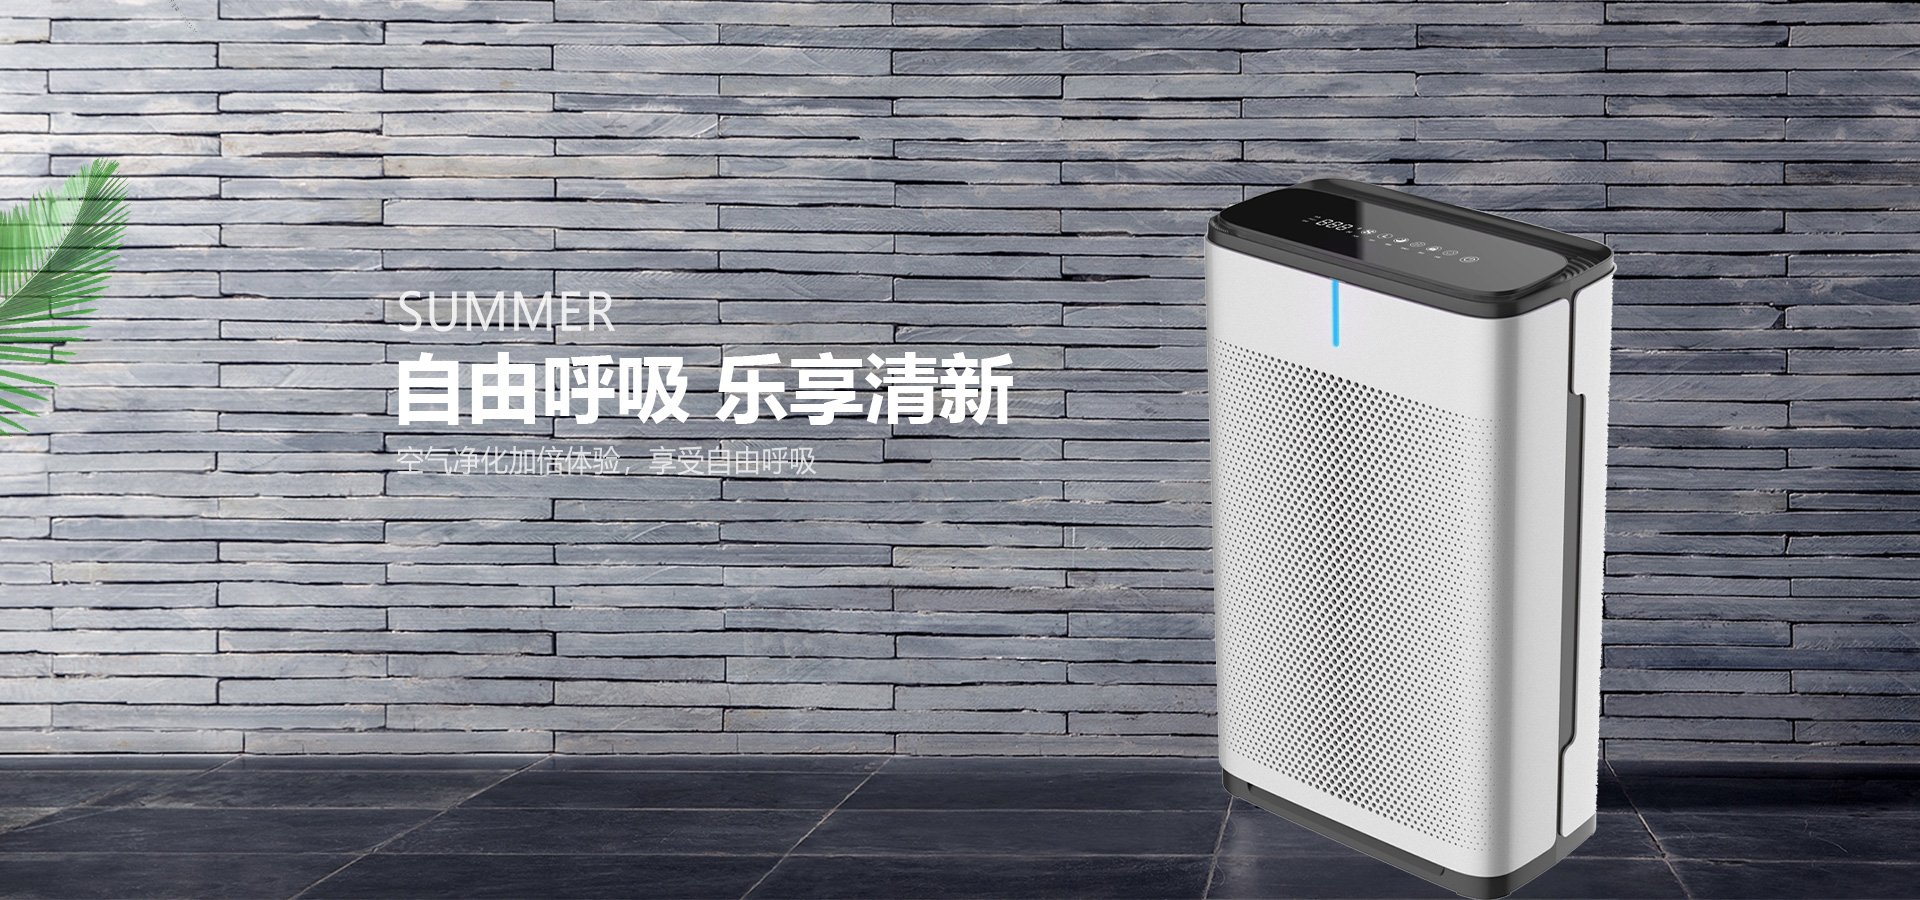 OEM Ozone sterilizing air purifier suppliers teach you the correct use of household air purifiers